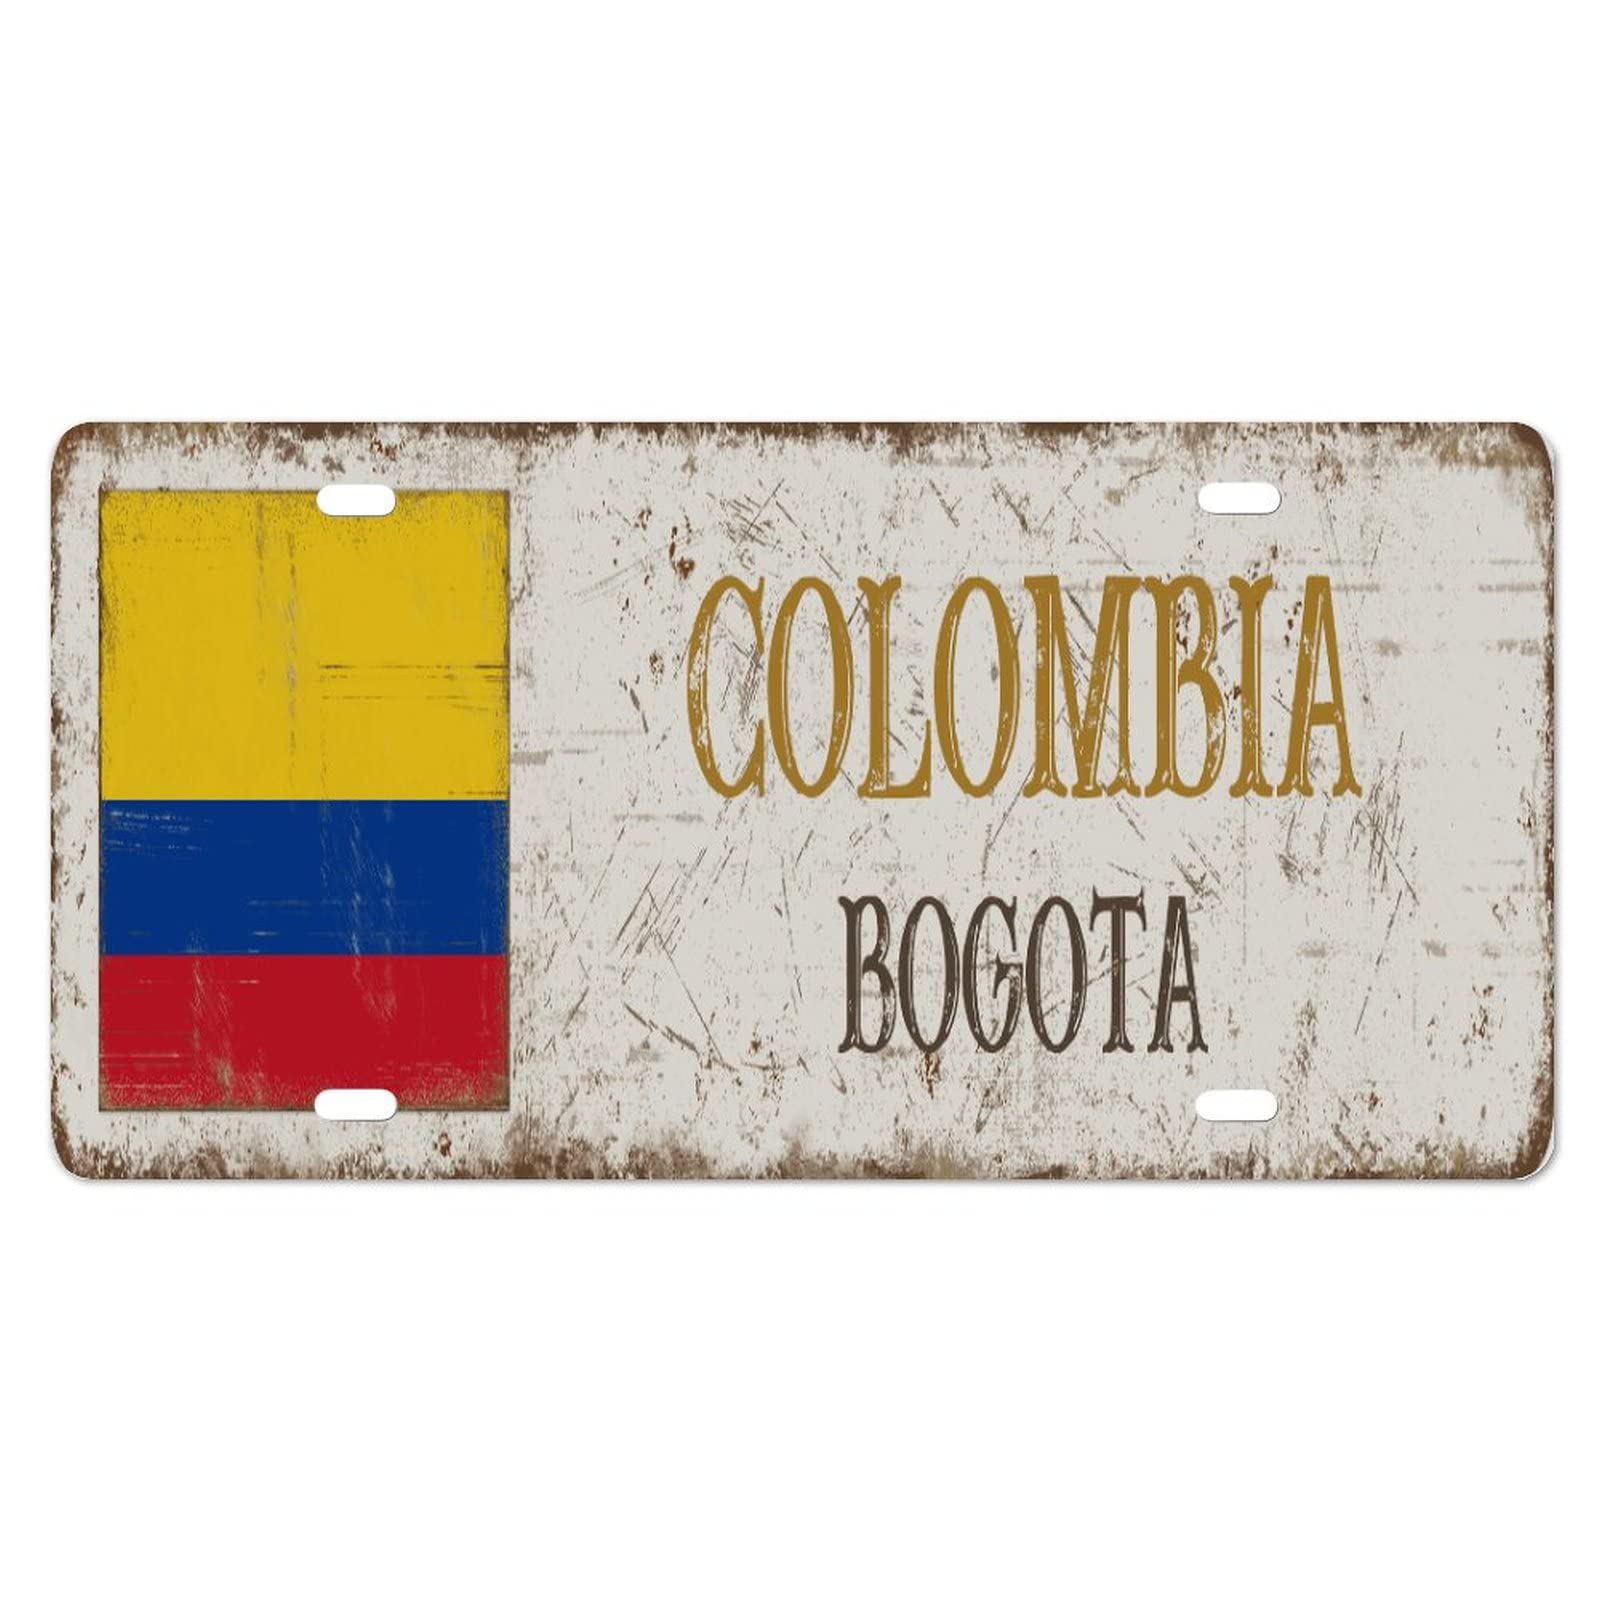 Yelolyio ColombiaLicense Plate for Front of Car Size 6x12 Inch Rust-Free Colombia Bogota Metal License Plate Colombia National Flag Aluminum Novelty License Plate Car Tags Gift for New Car von Yelolyio